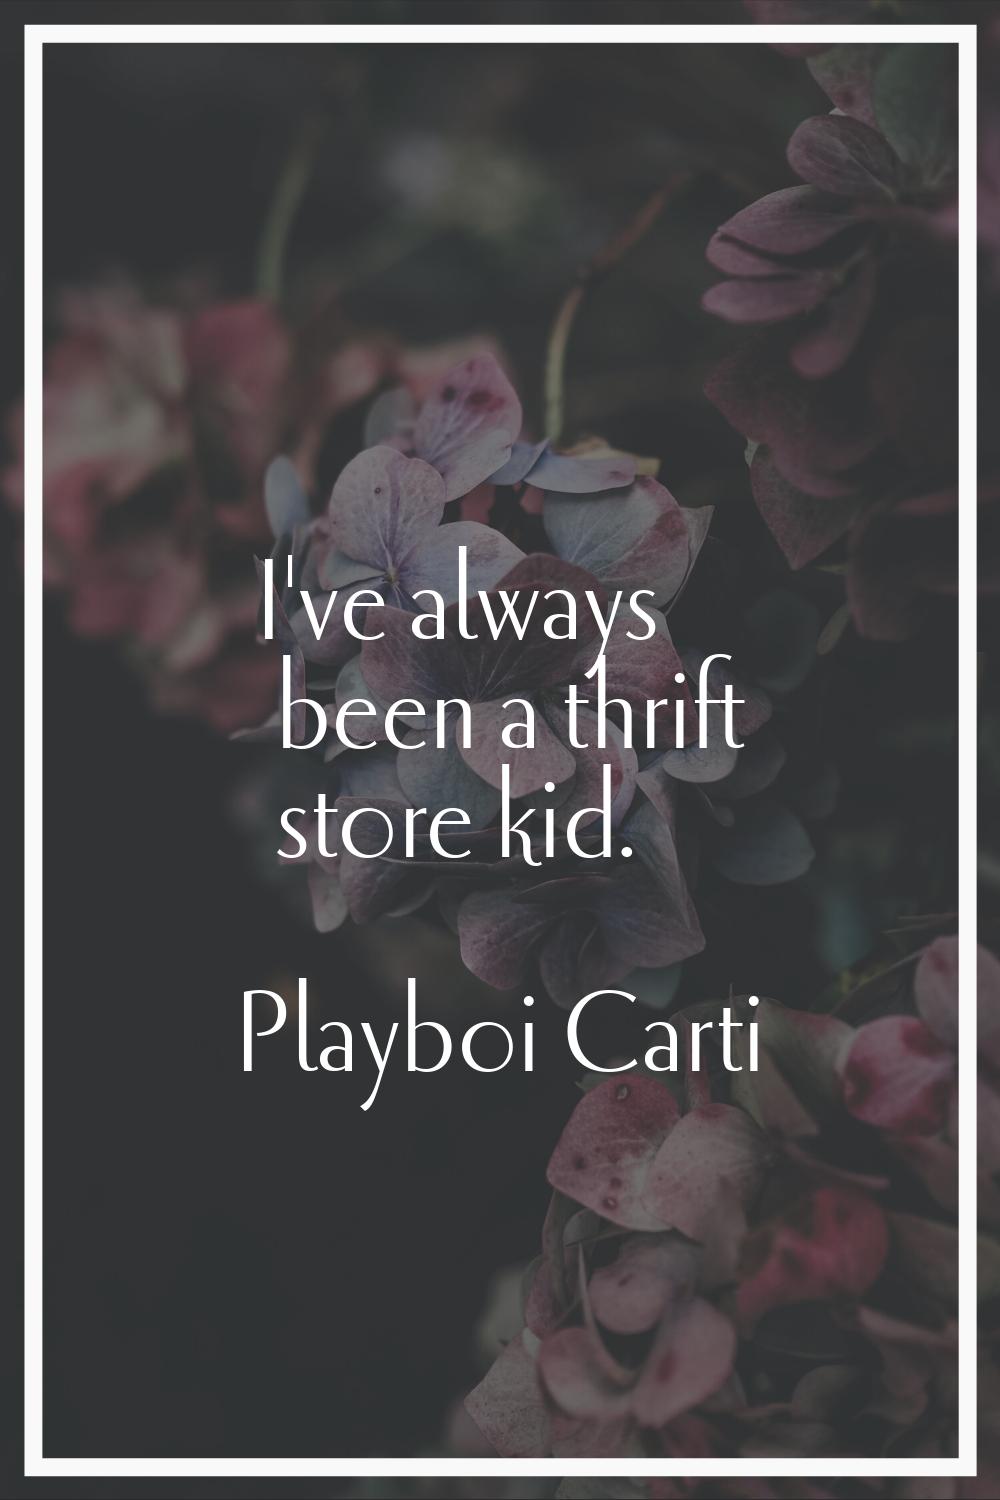 I've always been a thrift store kid.